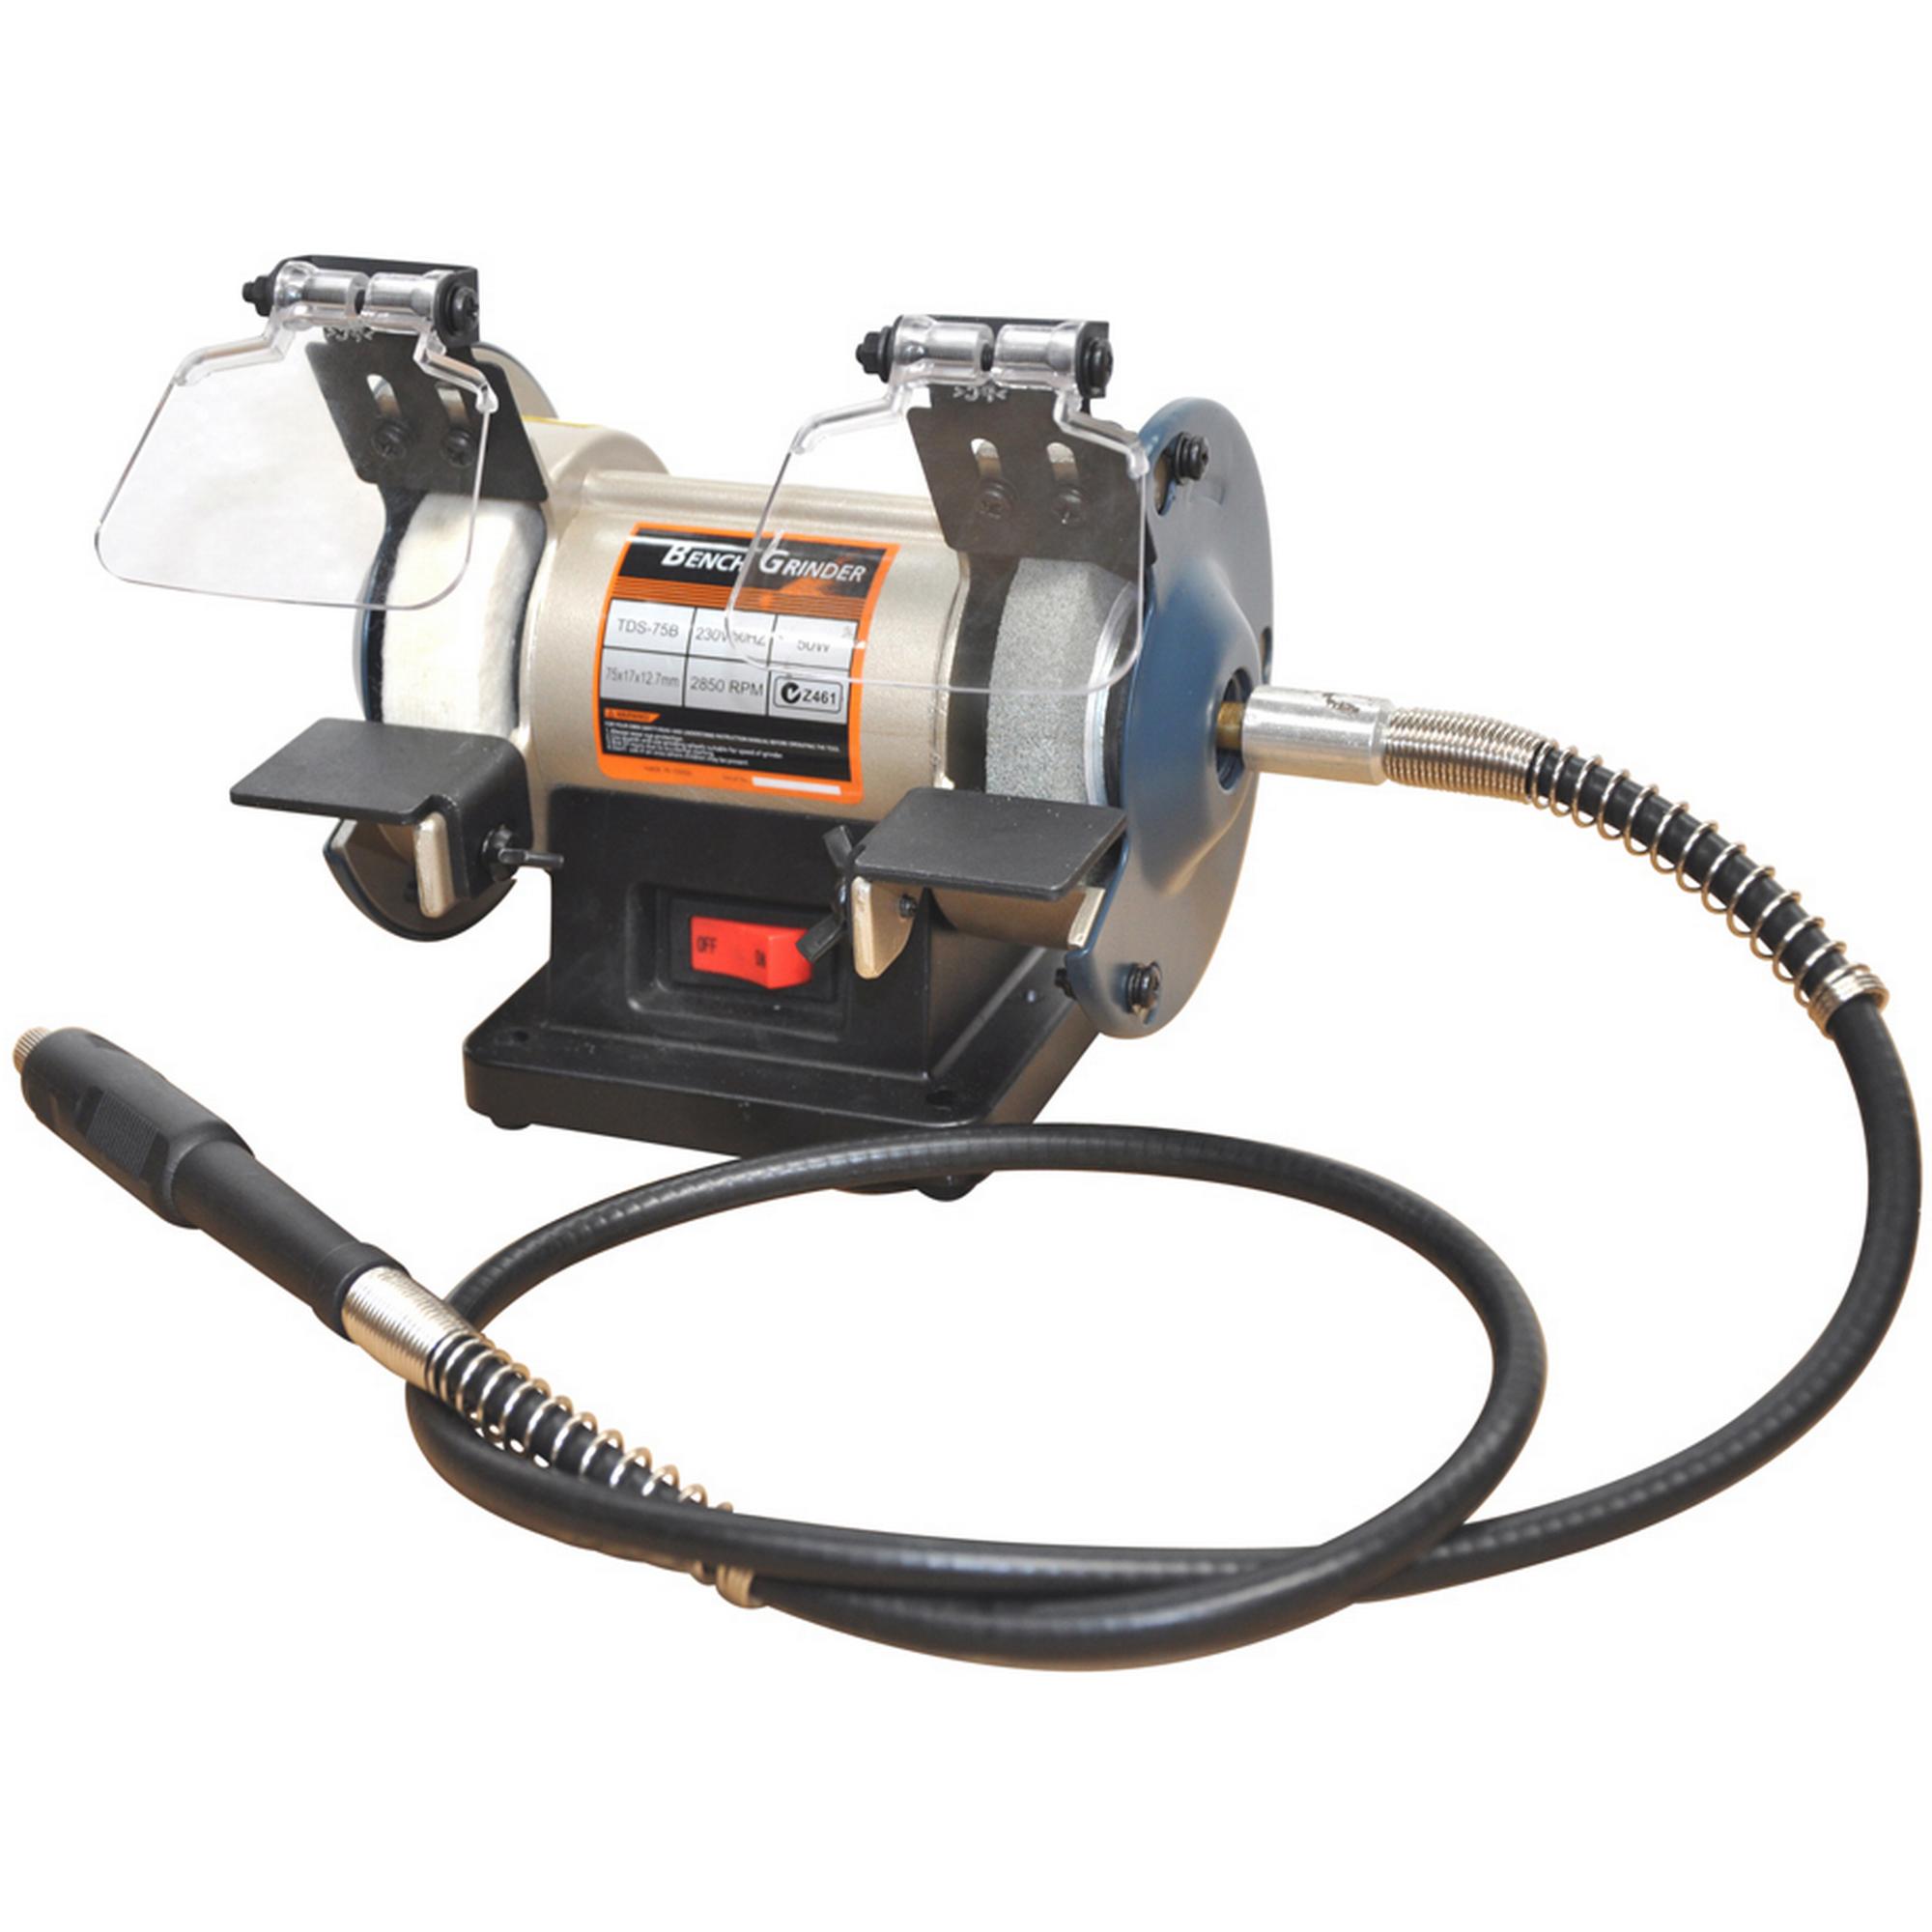 75mm Mini Bench Grinder With Flexible Shaft TopmaQ